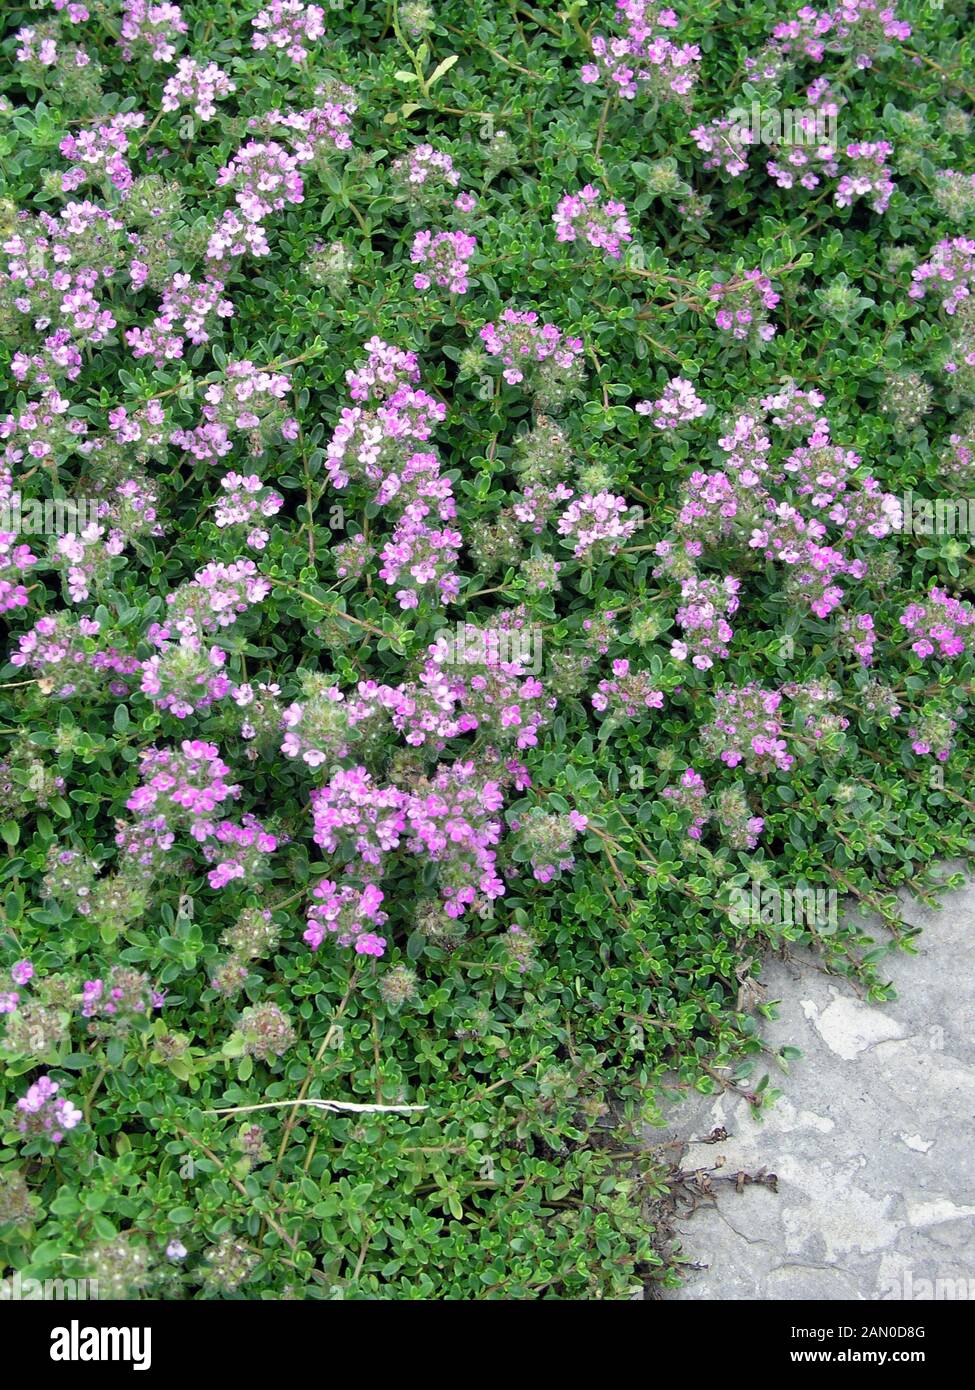 Featured image of post Purple Carpet Thyme : Garden thyme (thymus vulgaris linn.) click on graphic for larger image.